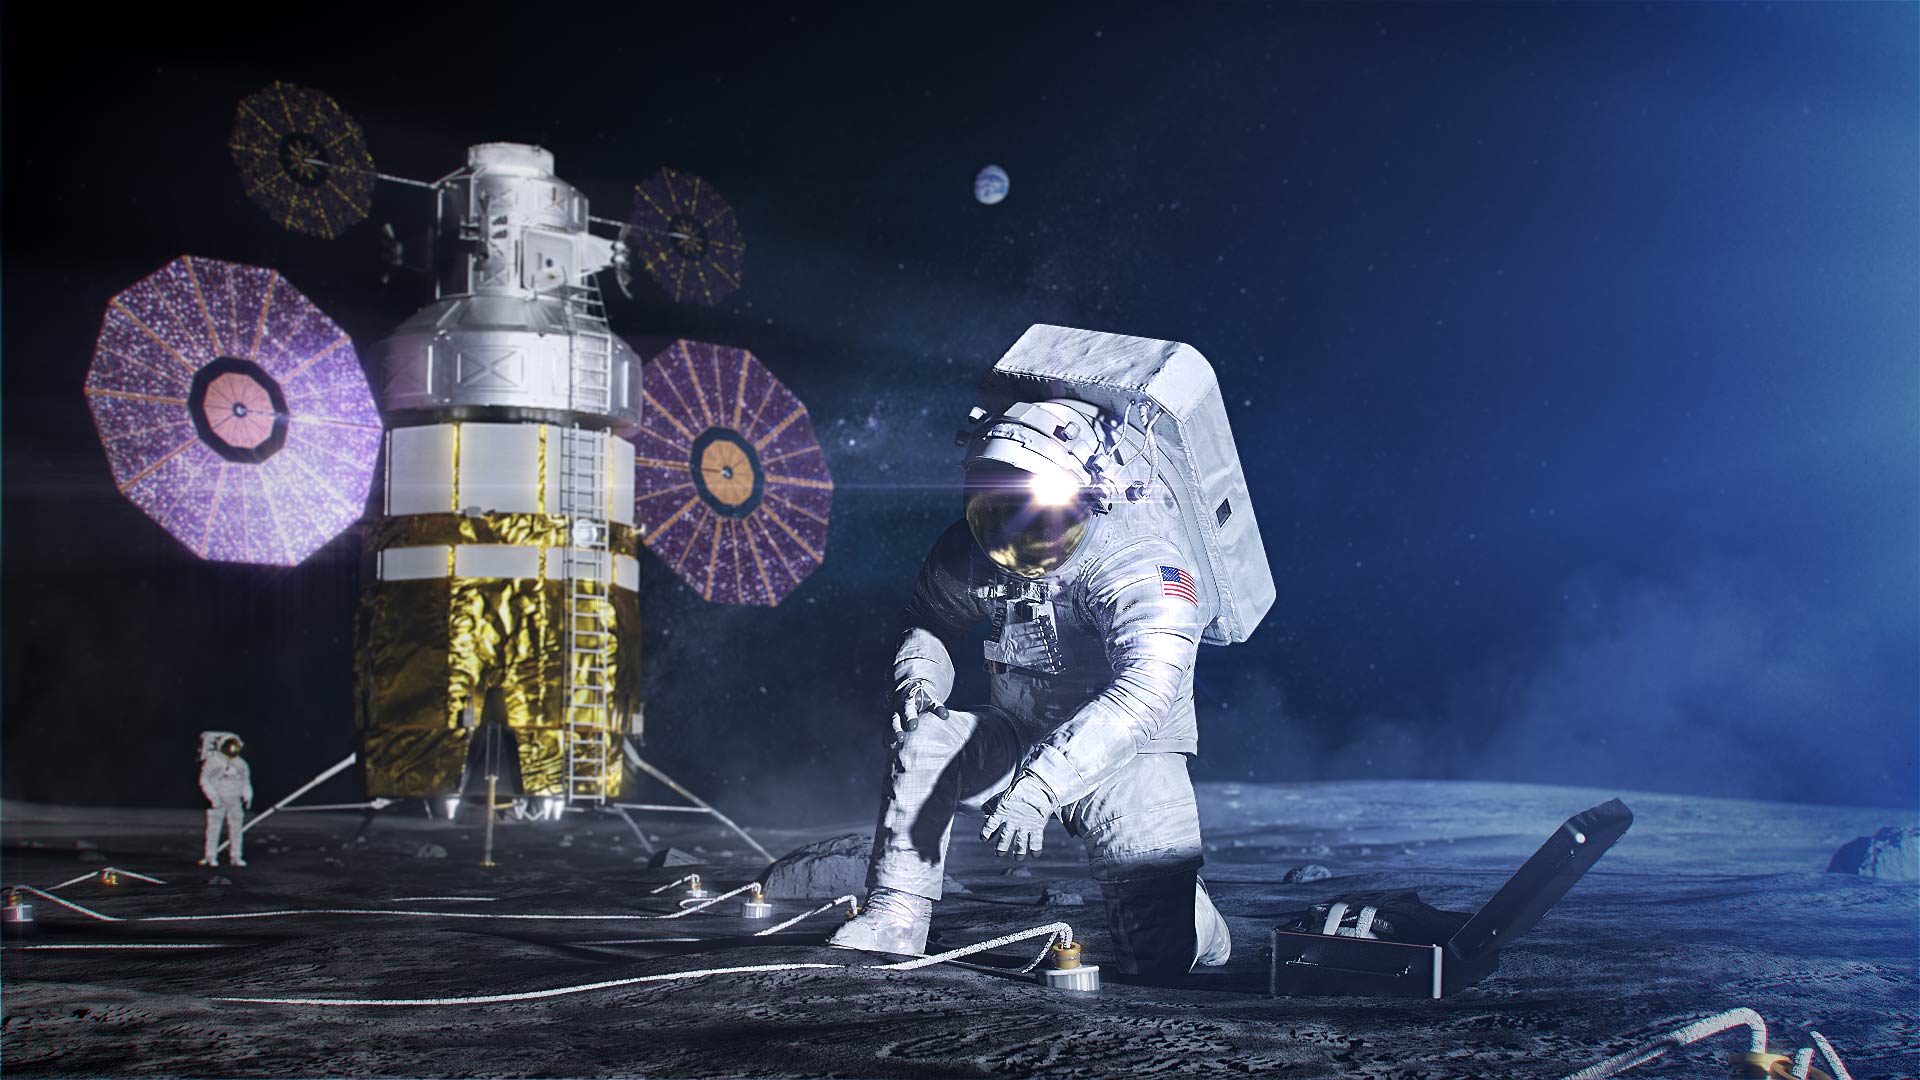 Artist concept of an astronaut in the xEMU space suit setting up a science experiment on the lunar surface.